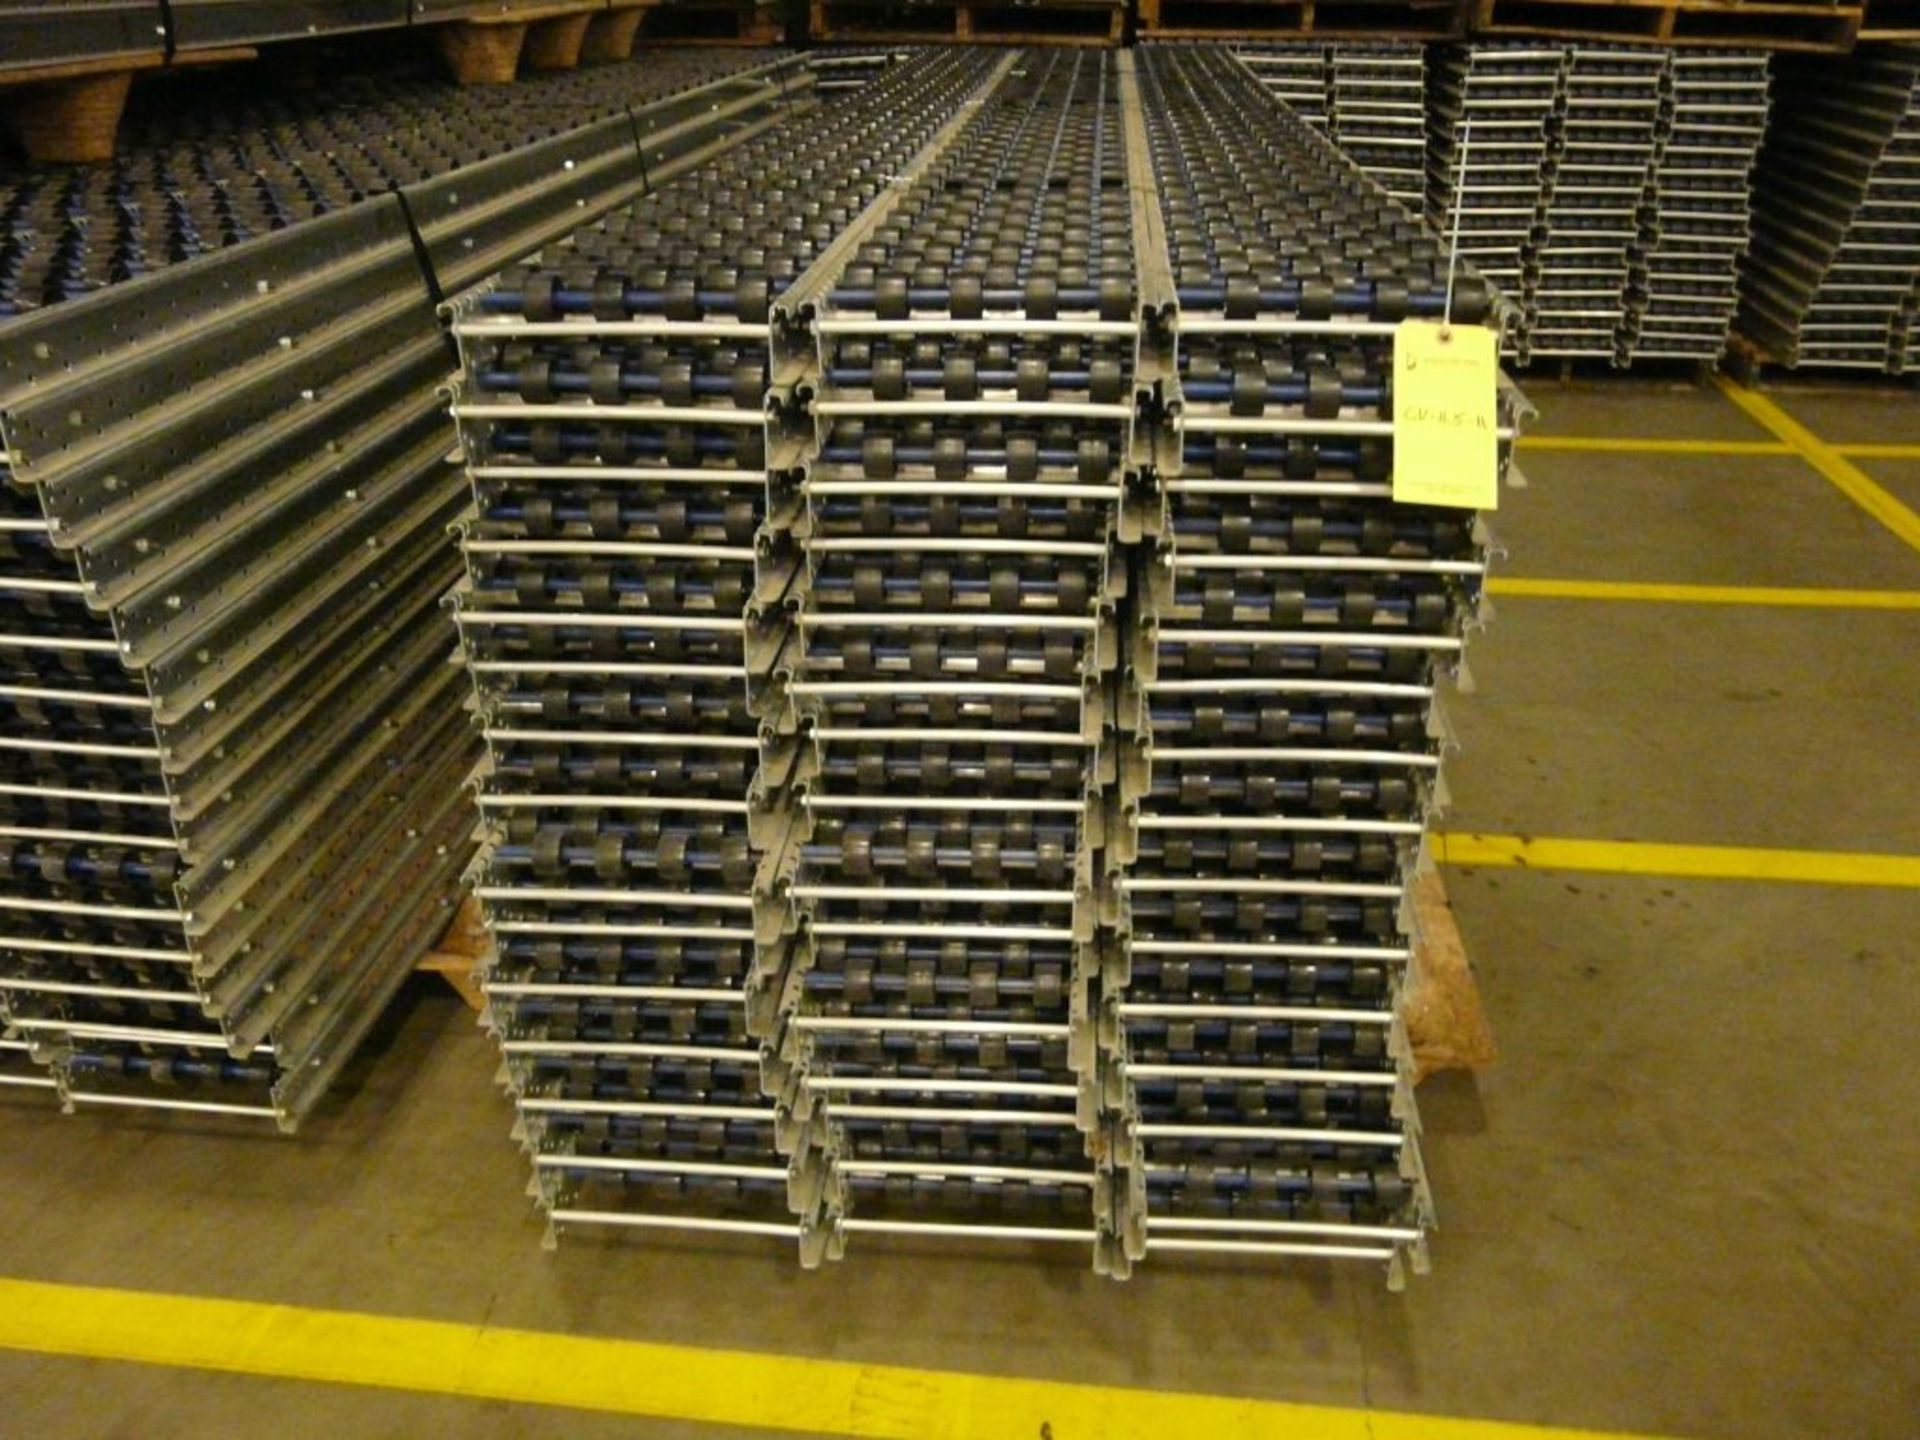 Lot of (90) SpanTrack Wheelbed Carton Flow Conveyors - 11.5'L x 11"W; Tag: 223602 - $30 Lot - Image 2 of 4